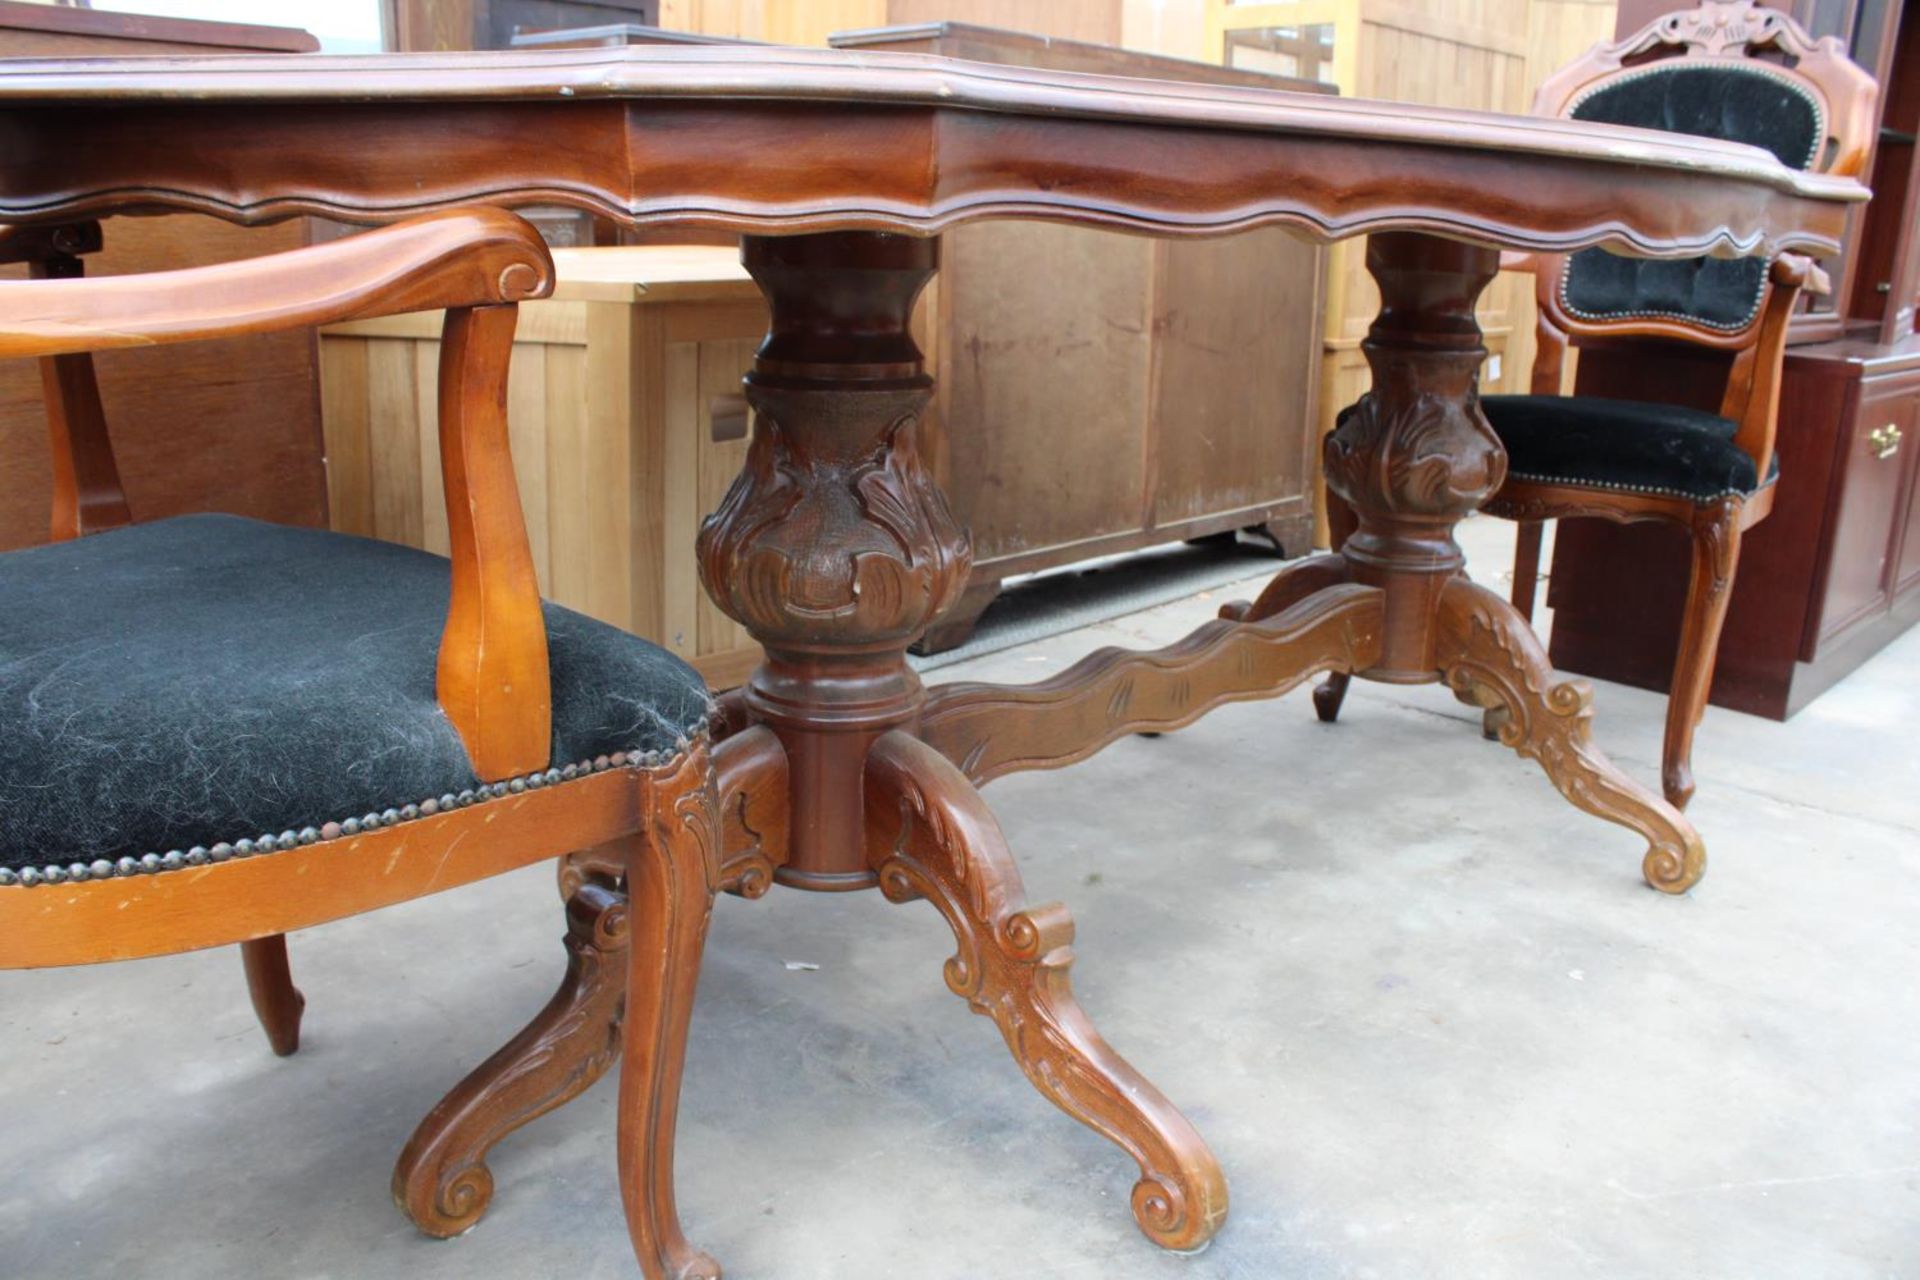 AN ITALIAN STYLE PEDESTAL DINING TABLE WITH MARQUETRY TOP AND A PAIR OF CARVER CHAIRS - Image 6 of 6